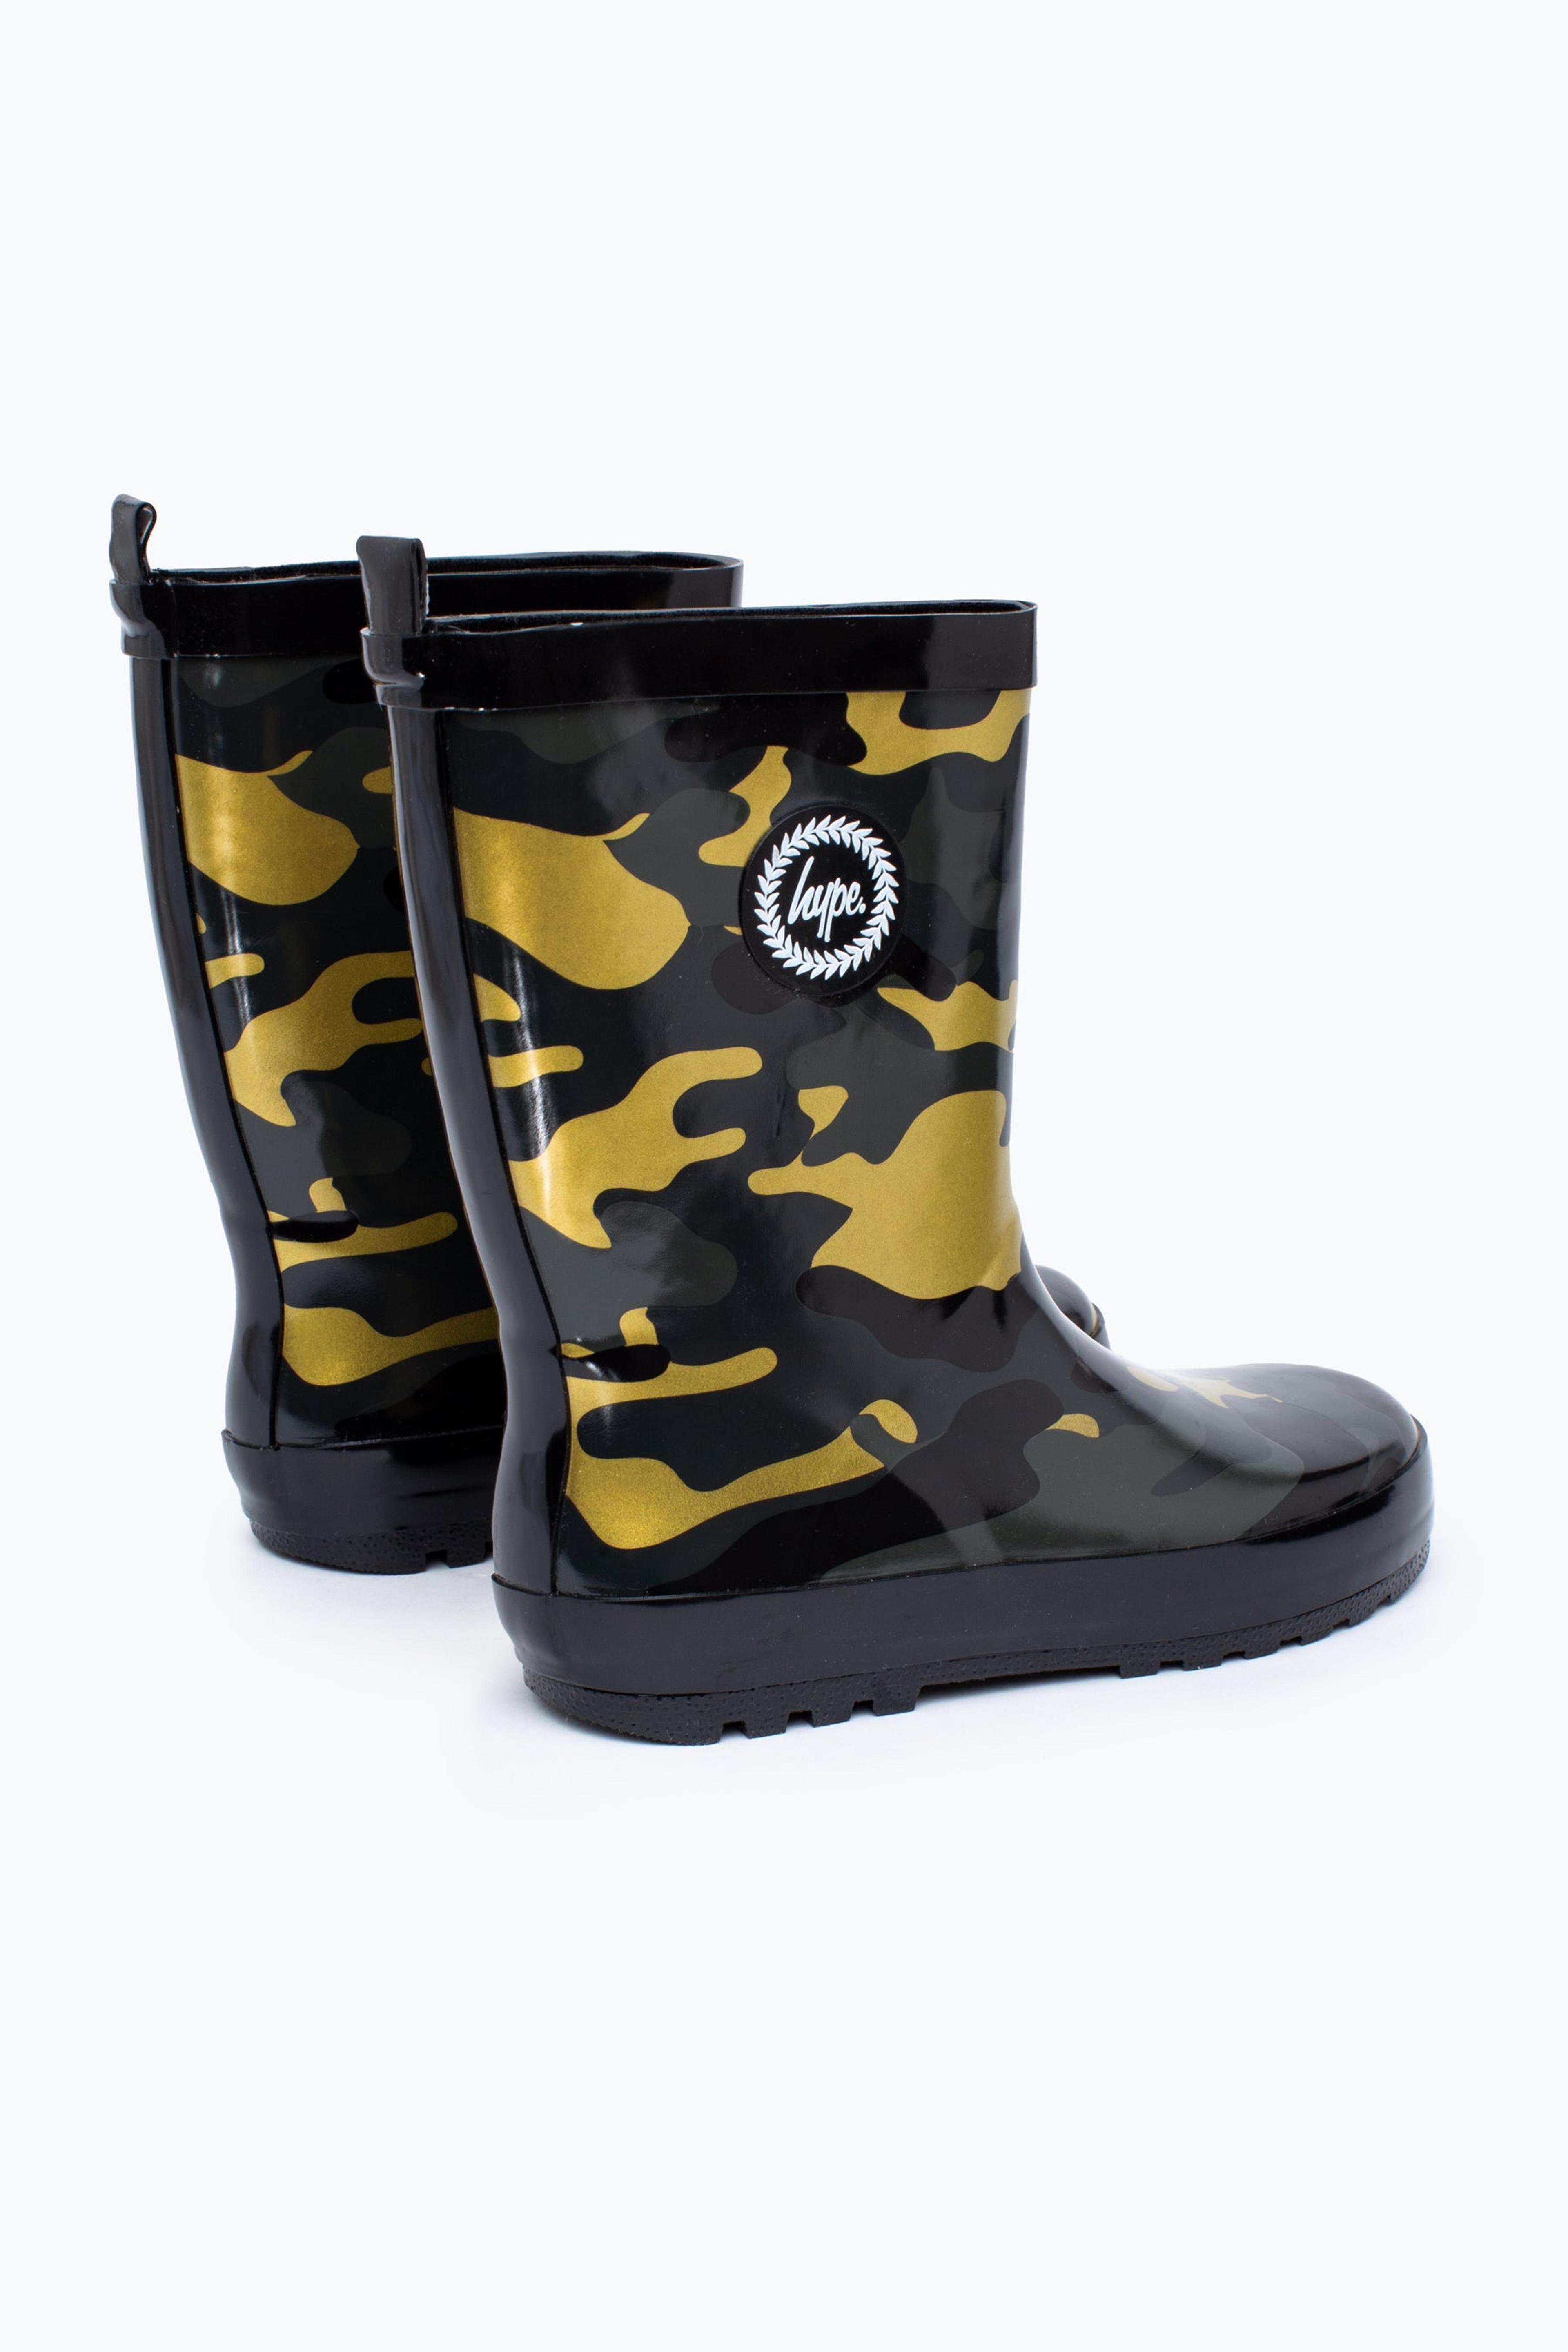 Alternate View 1 of HYPE KIDS UNISEX GOLD CAMO WELLIES